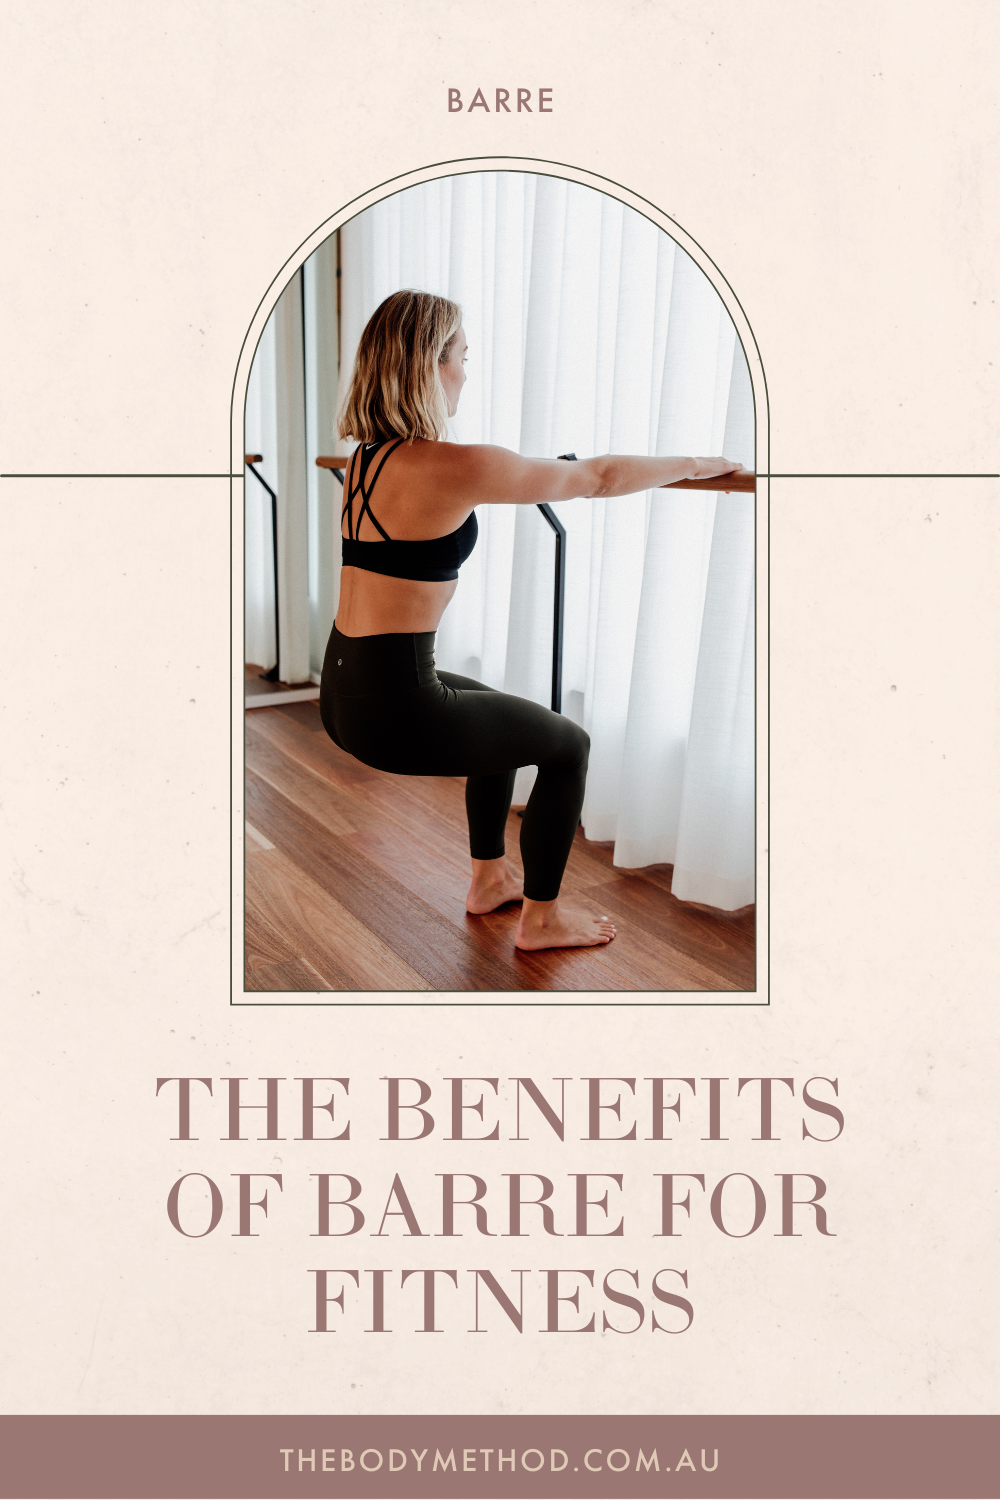 The Body Method — The Benefits of Barre for Fitness: Improved